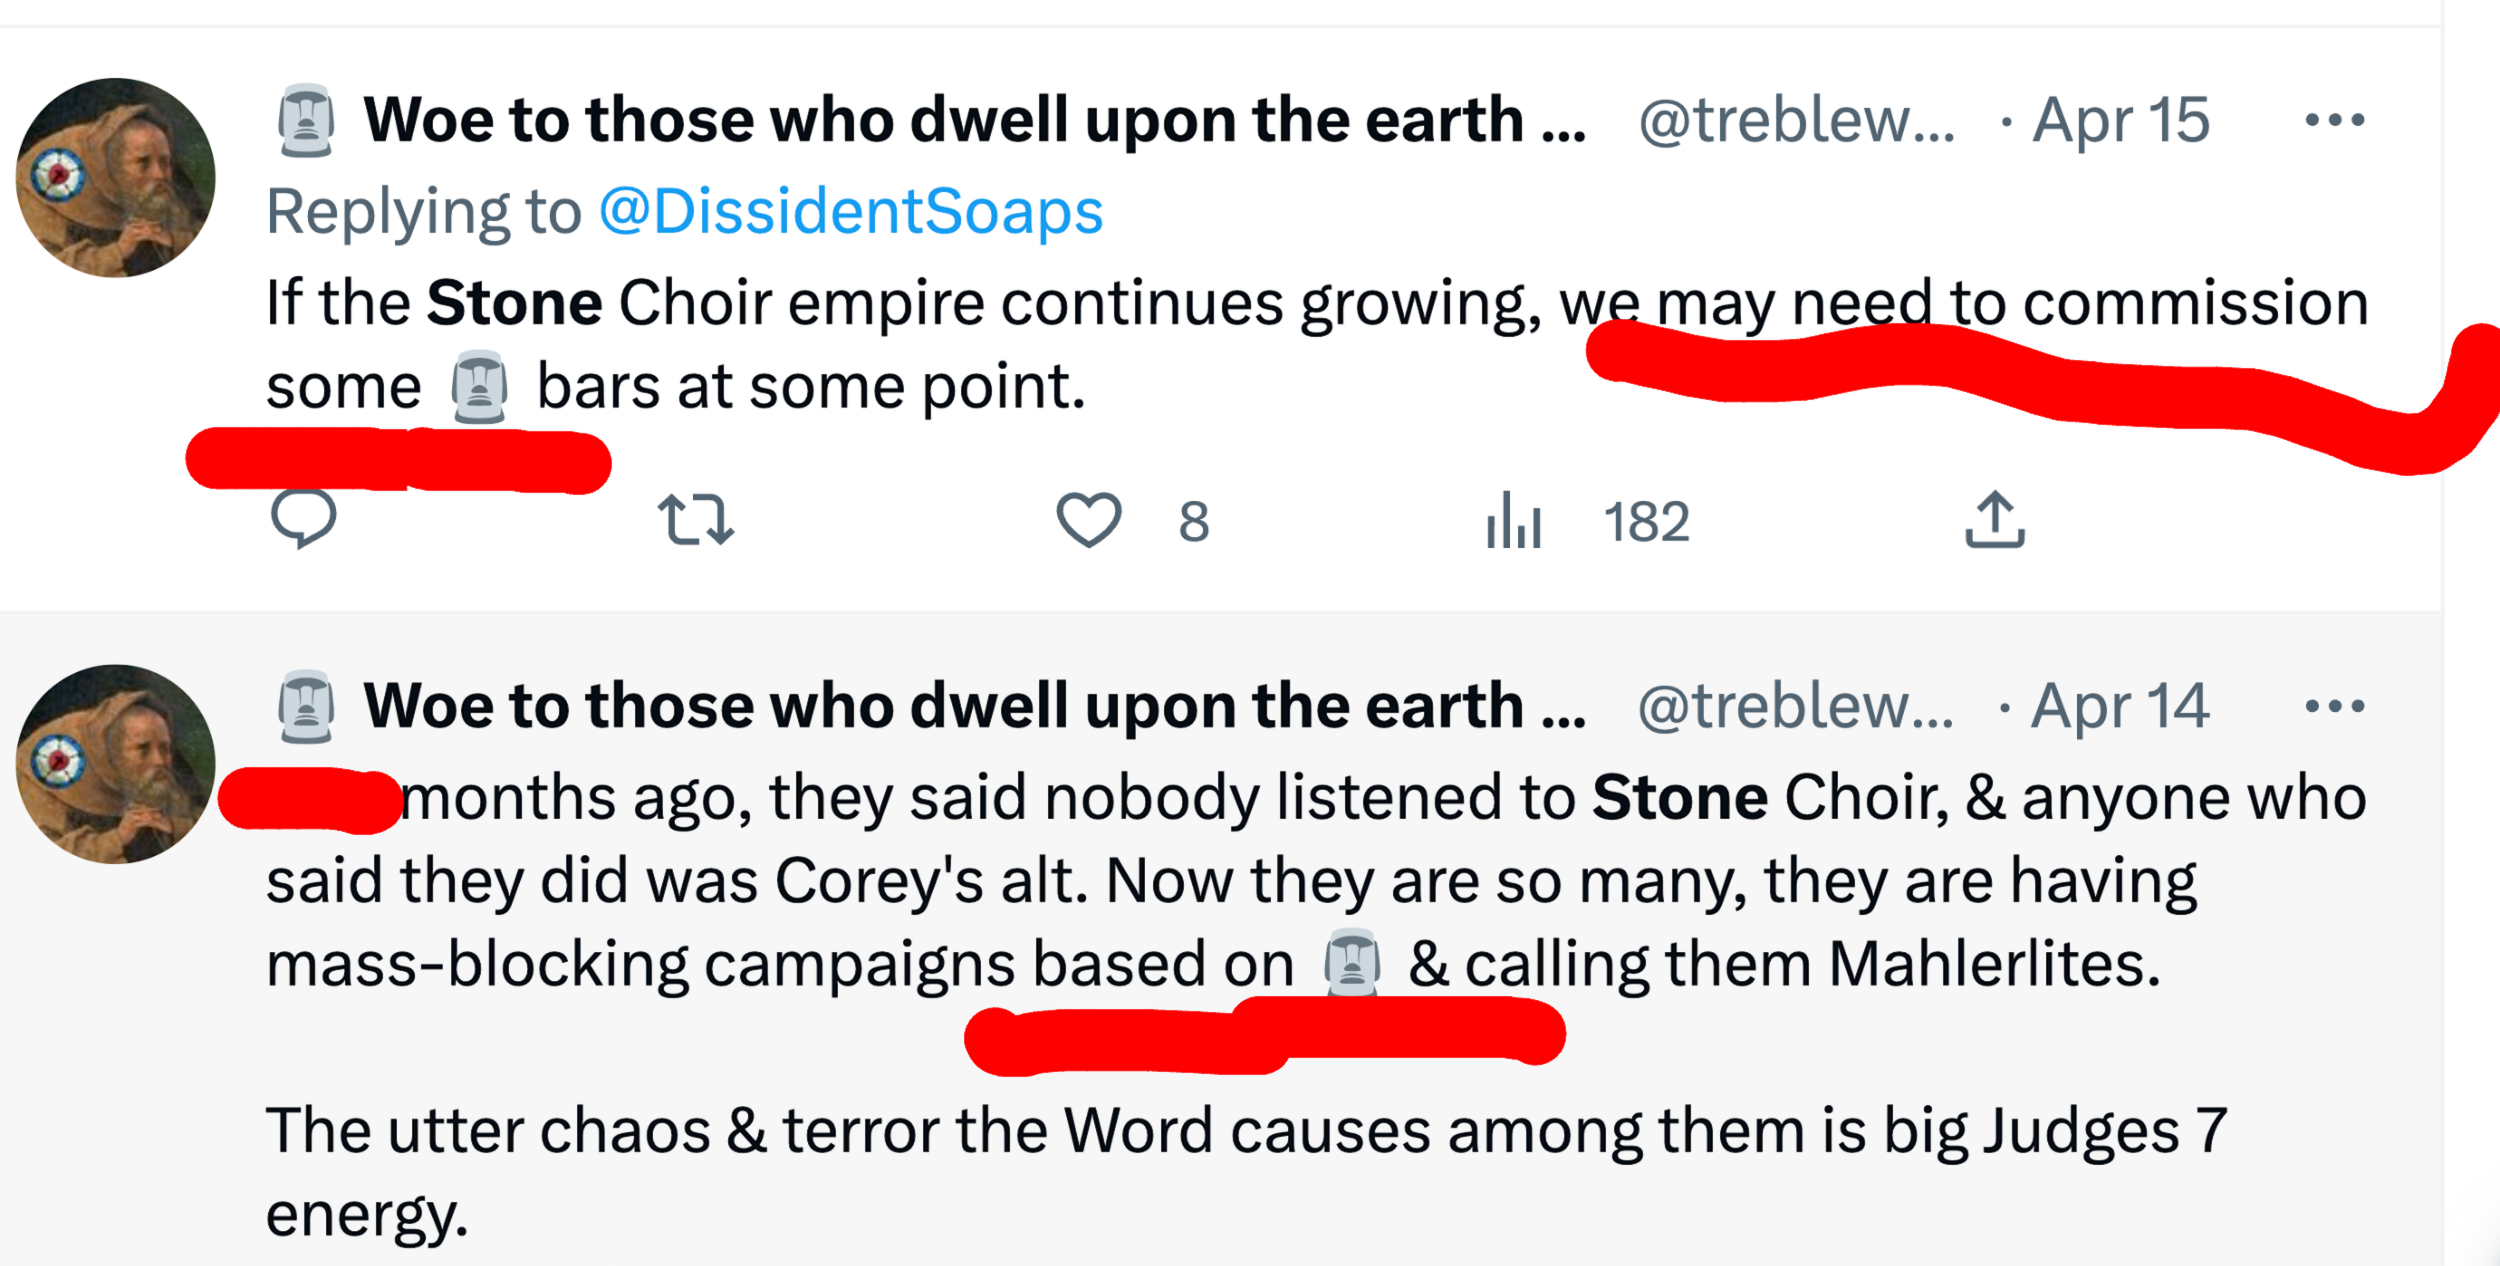 Woe as @treblewoe, replying to @dissidentsoaps (Apr. 15): "If the Stone Choir empire continues growing, we may need to commission some [STONE CHOIR ICON] bars at some point." Also @treblewoe (Apr. 14): "___ months ago, they said nobody listened to Stone Choir, and anyone who said they did was Corey's alt. Now there are so many, they are having mass-blocking campaigns absed on [STONE CHOIR ICON] and calling them Mahlerites. The utter chaos and terror the Word causes among them is big Judges 7 energy." Stone Choir icon also in Treblewoe's handle.